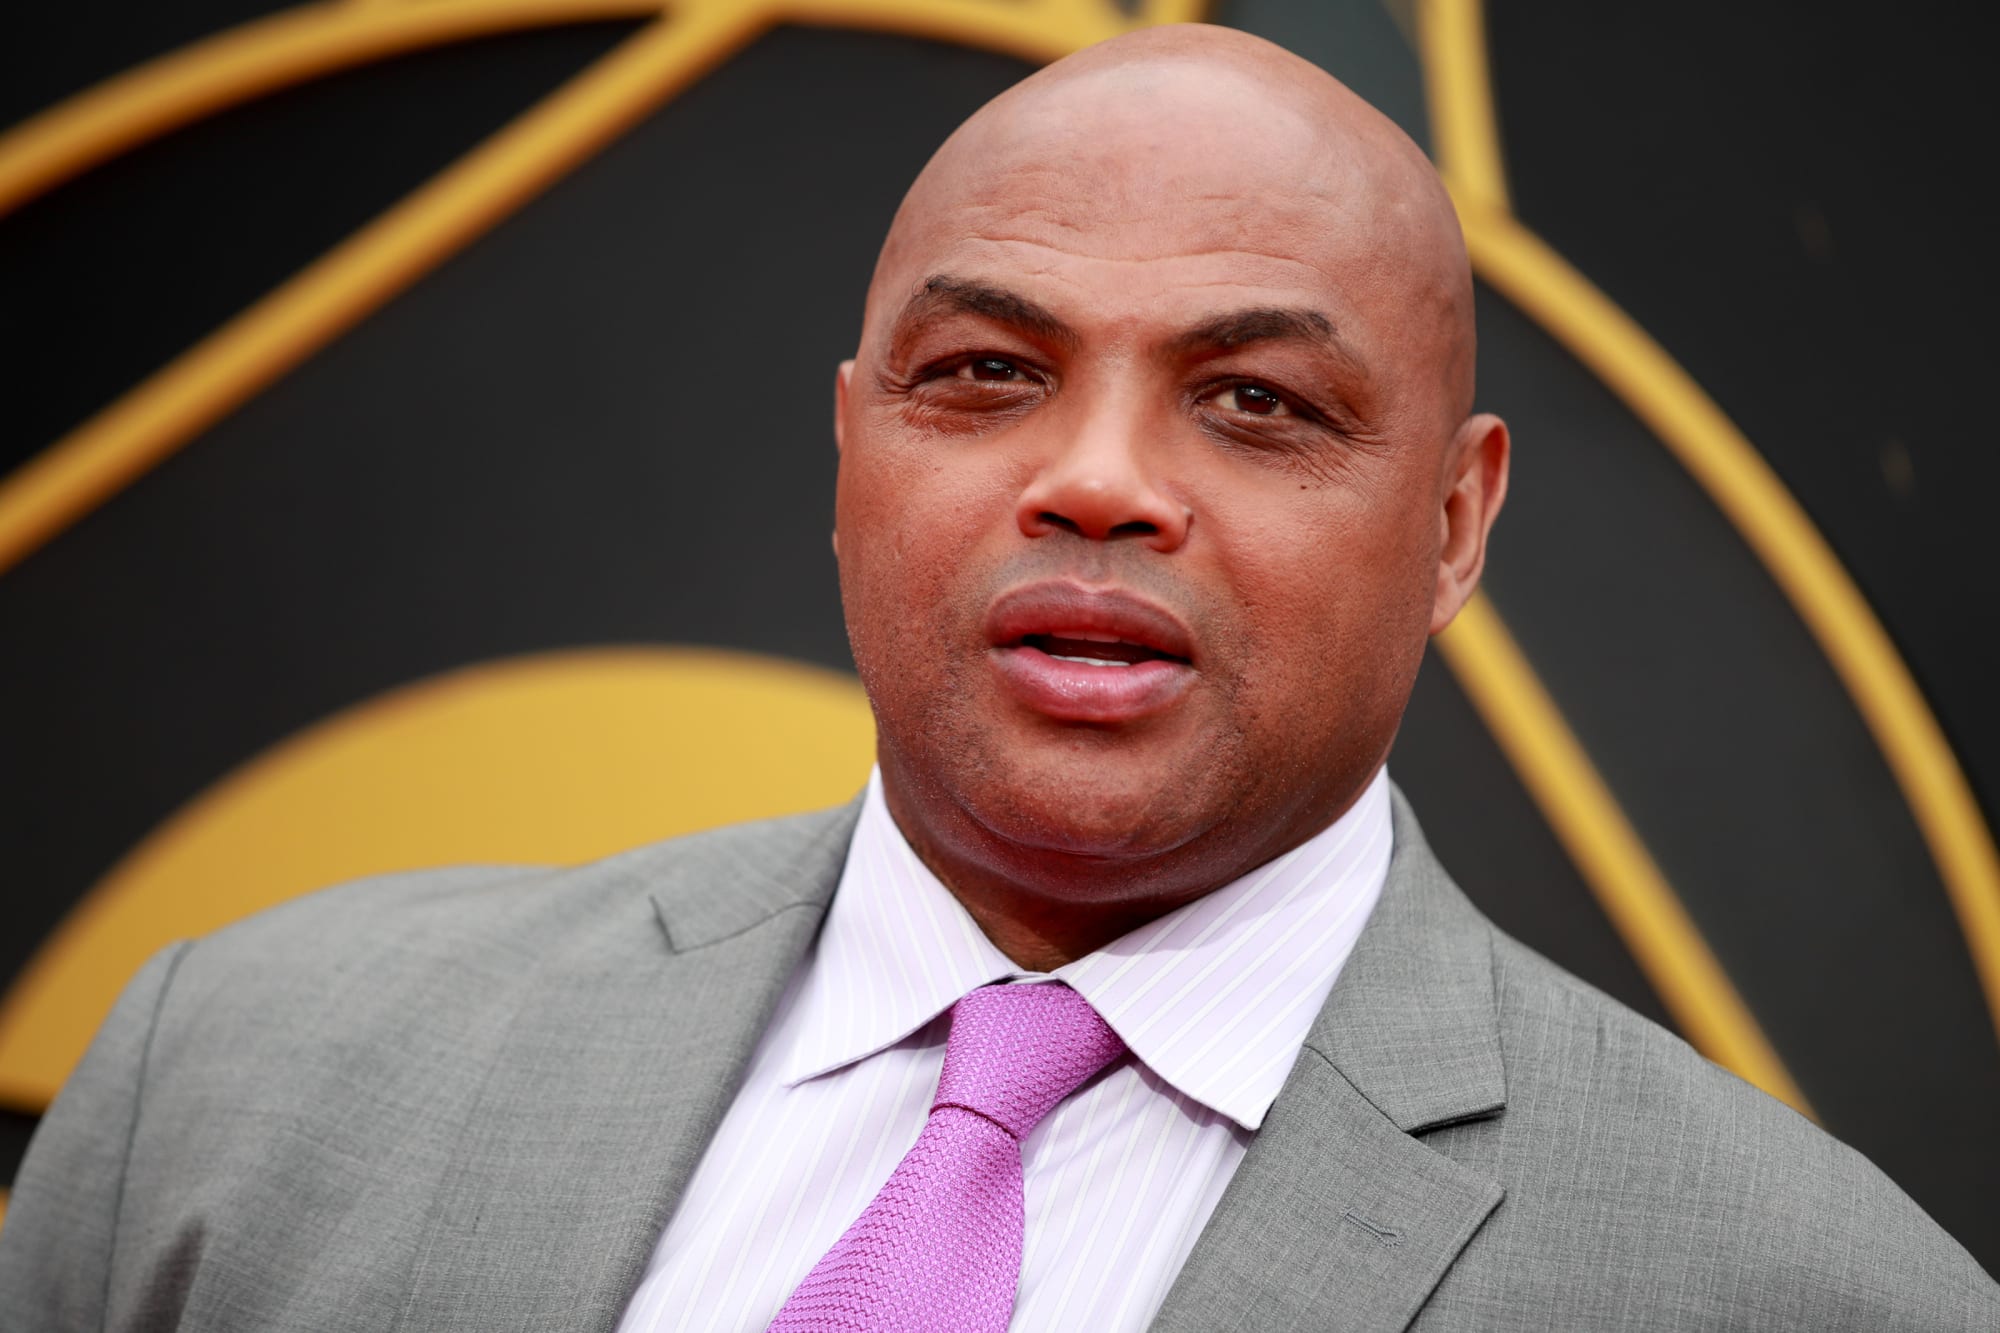 Warriors: Charles Barkley backing off his Golden State hate is pathetic